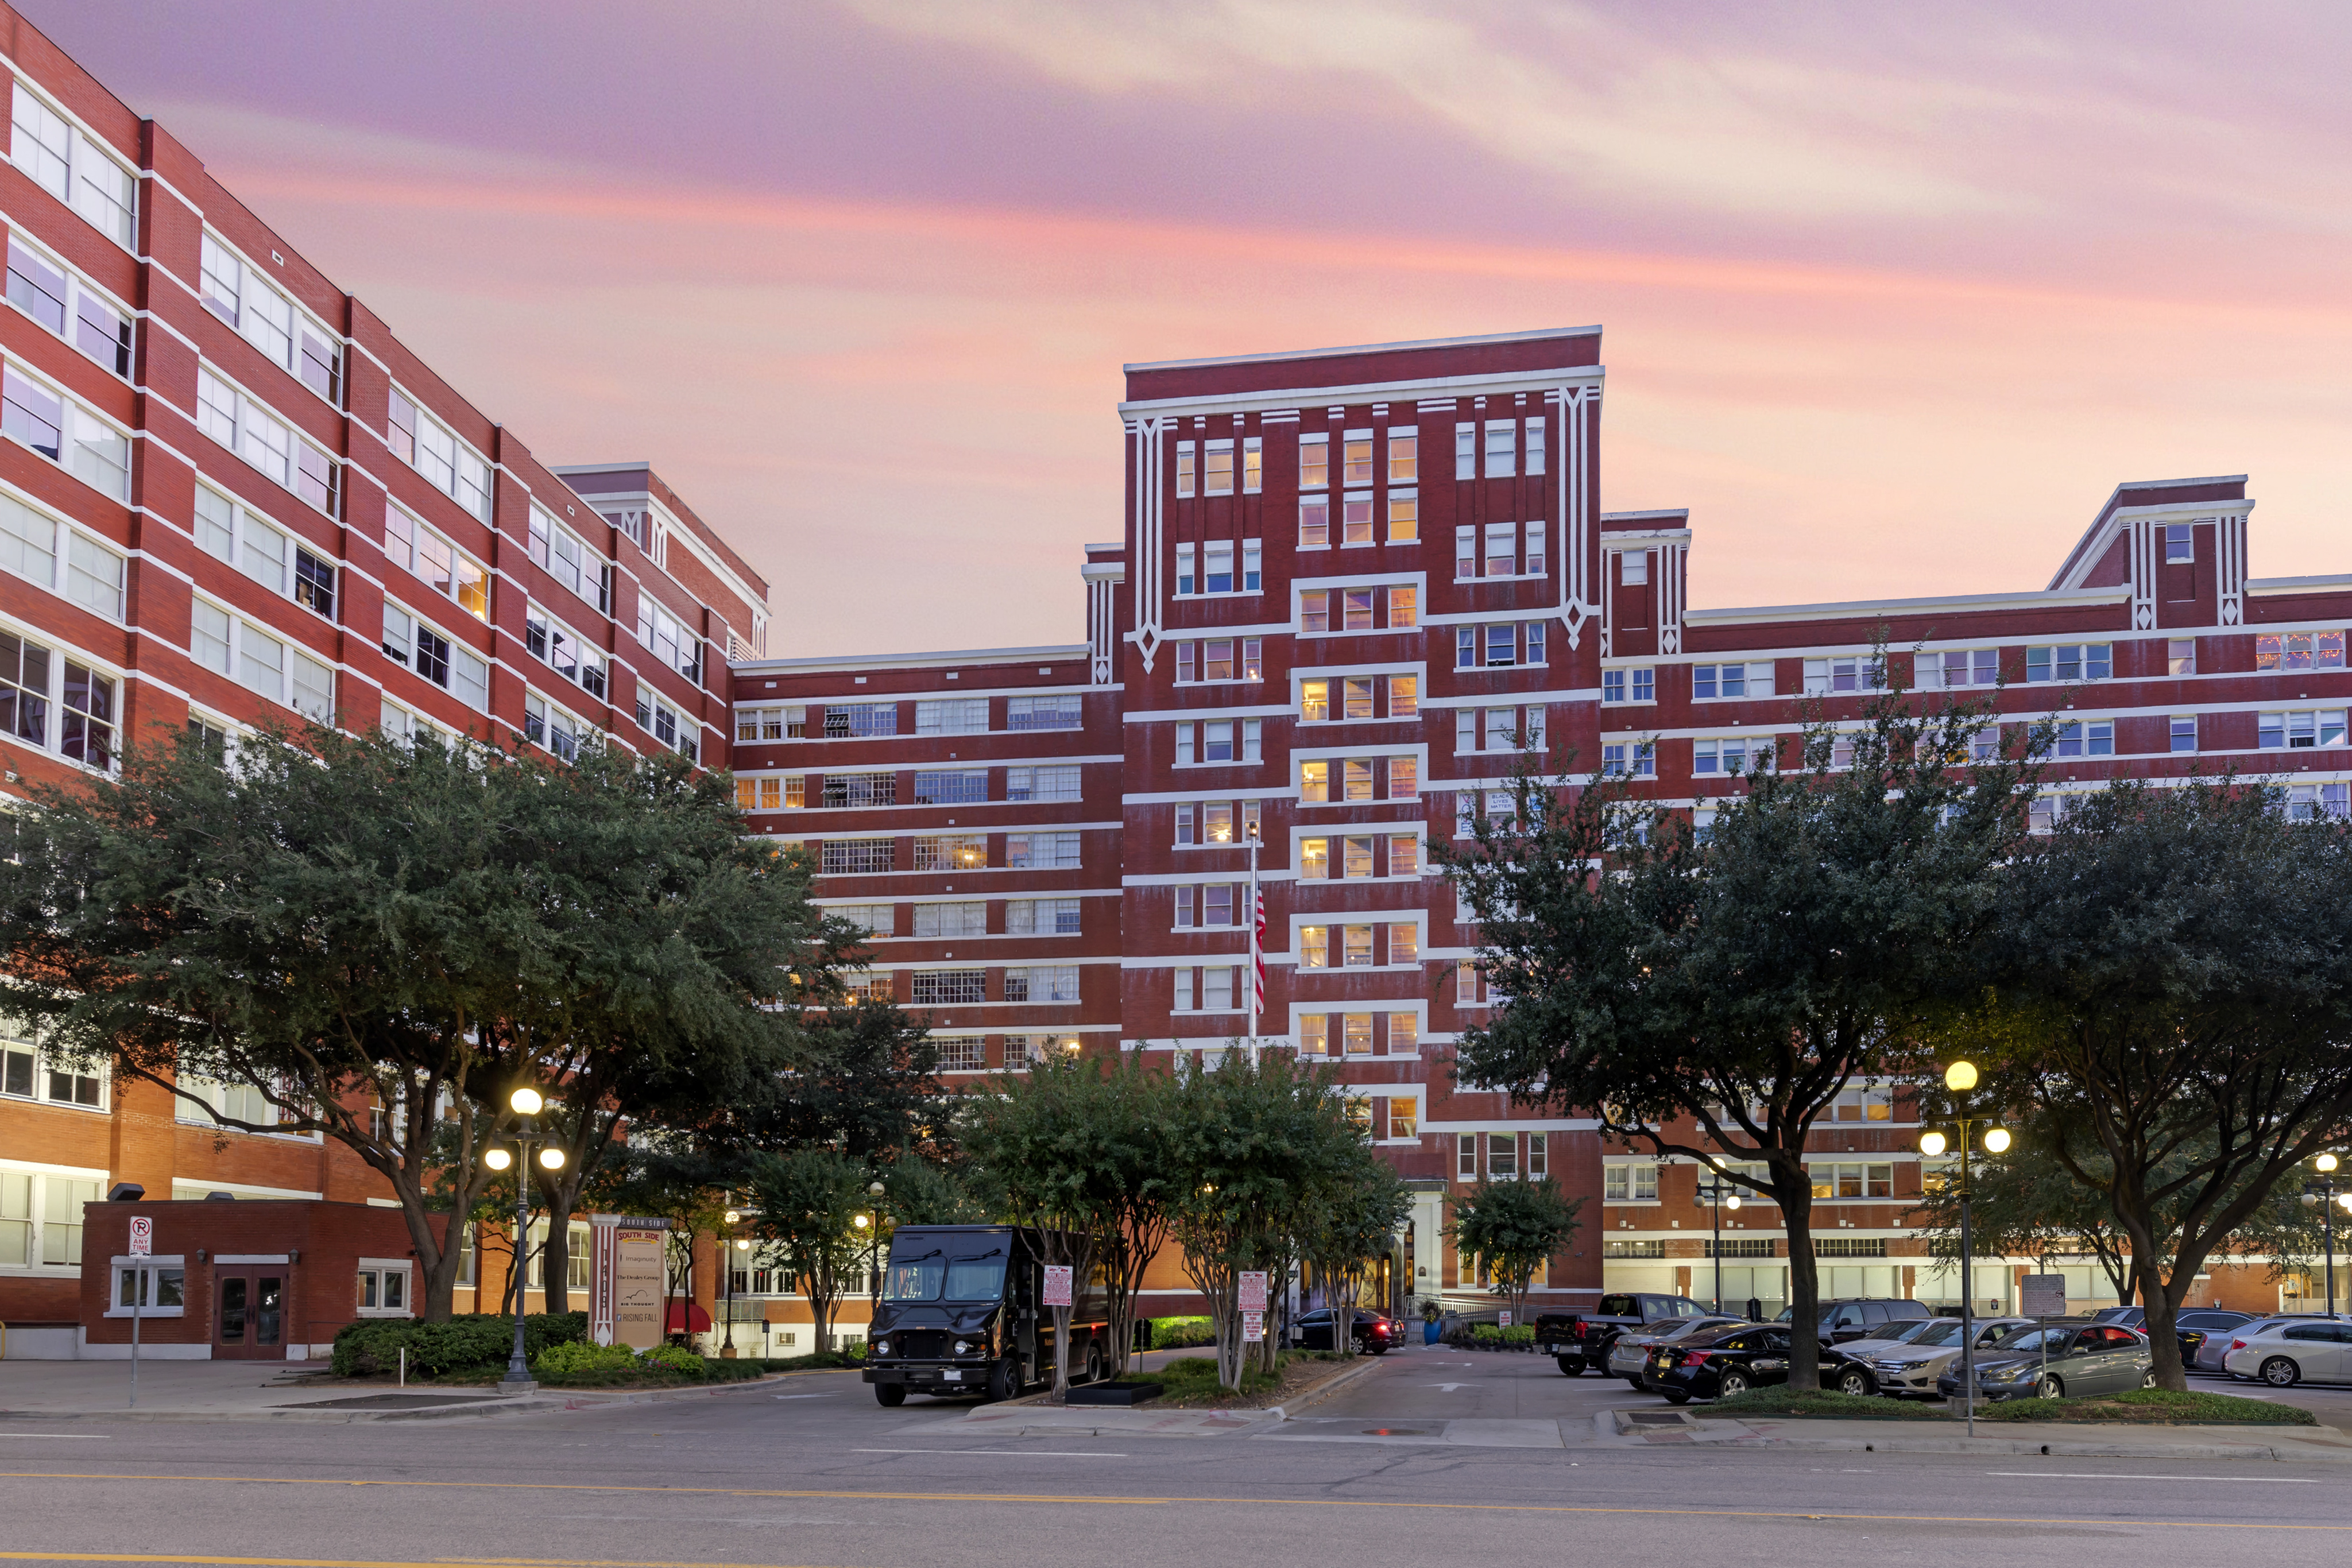 Southside On Lamar Apartments Located In Downtown Dallas